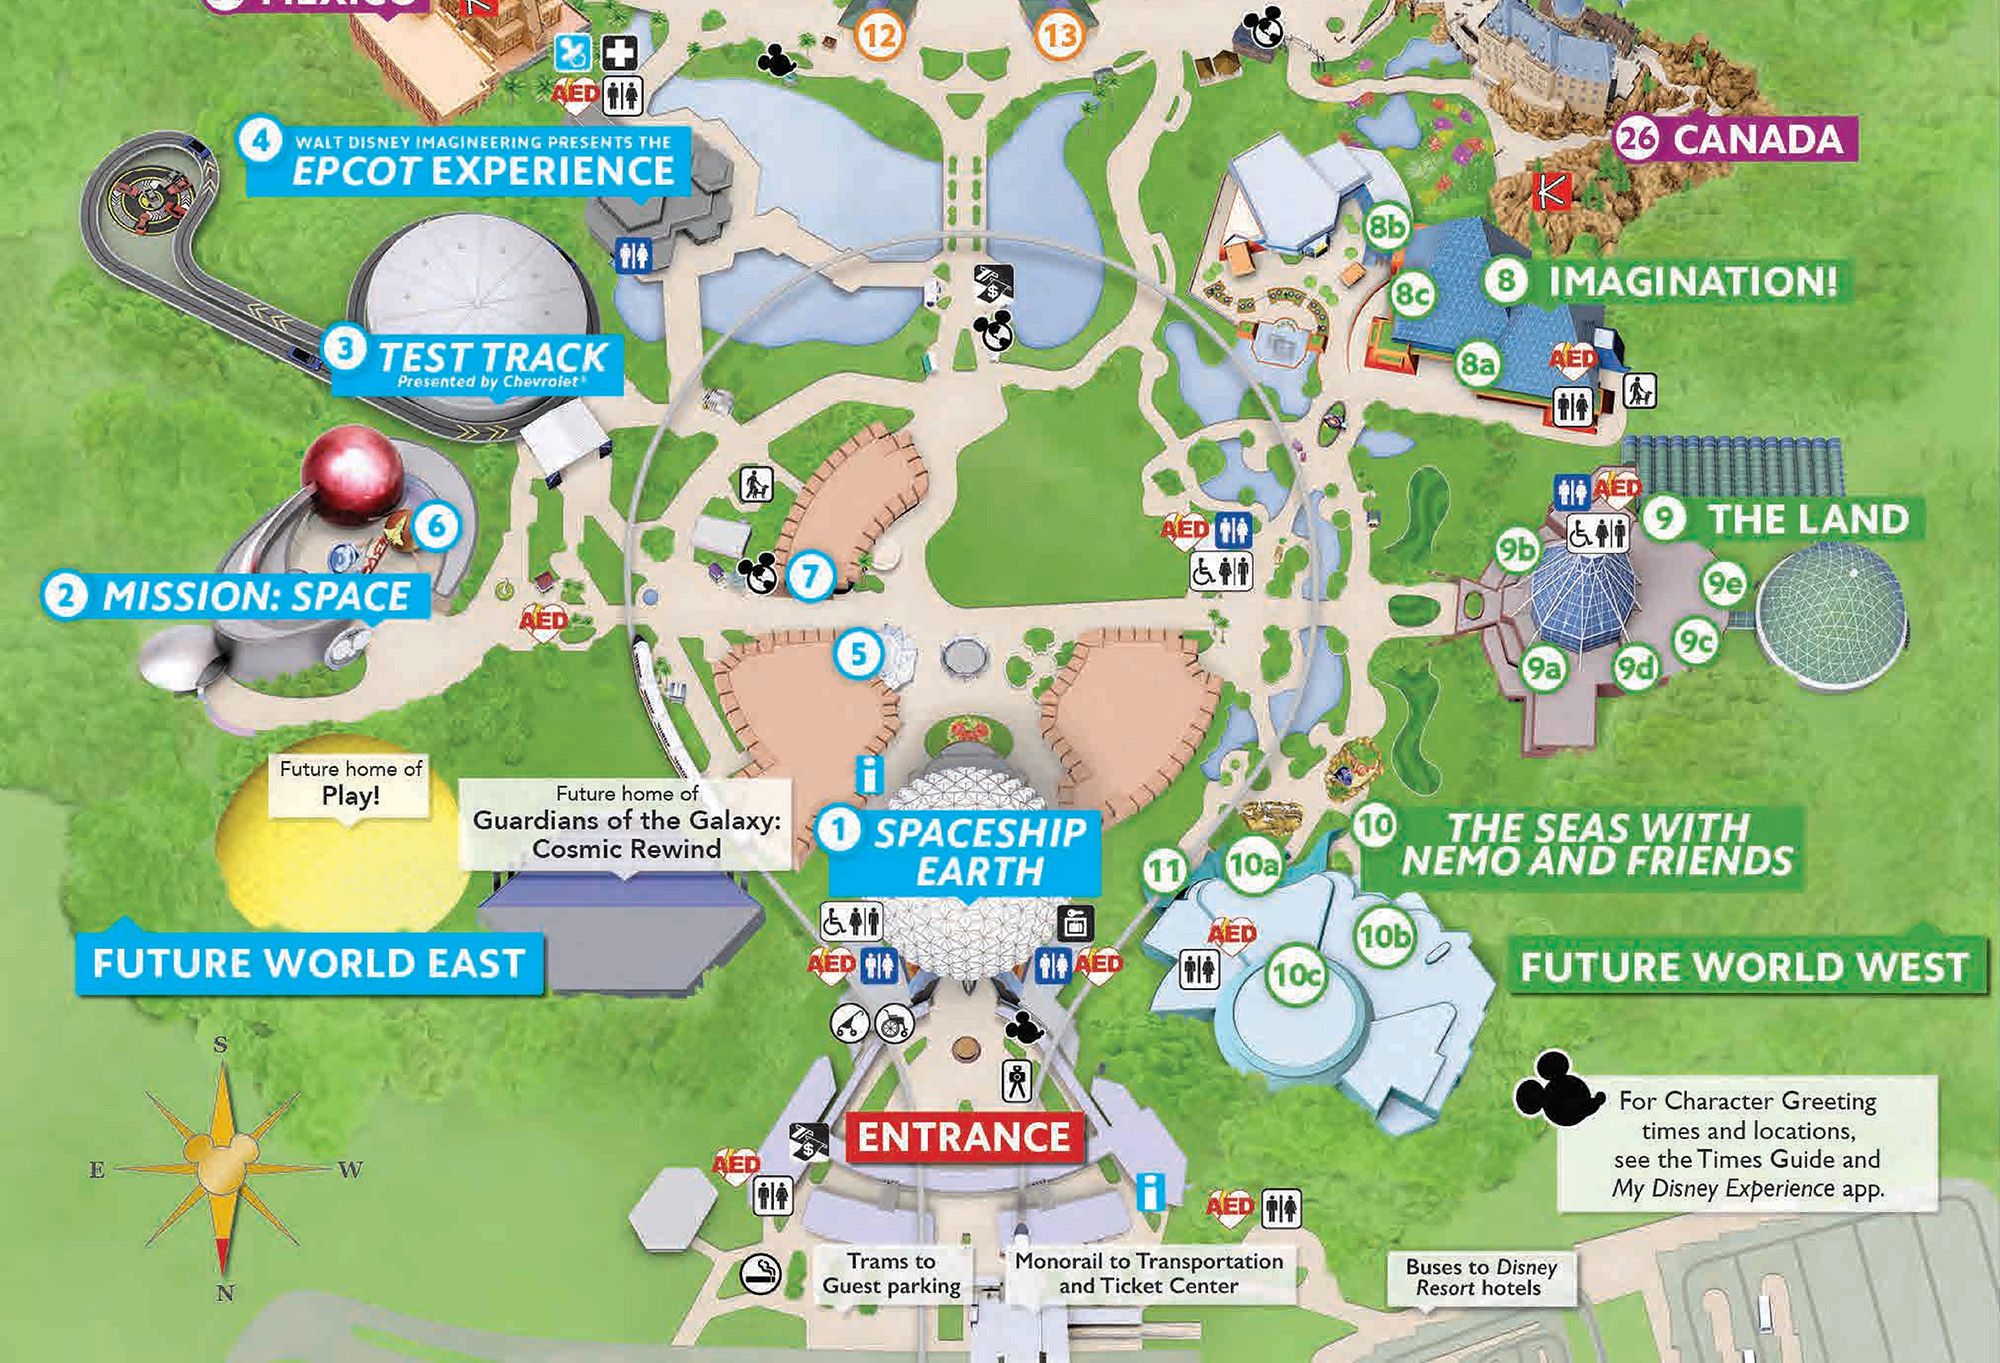 Epcot Map Printable Cosmic Rewind This Weekend At Epcot, A New Guide